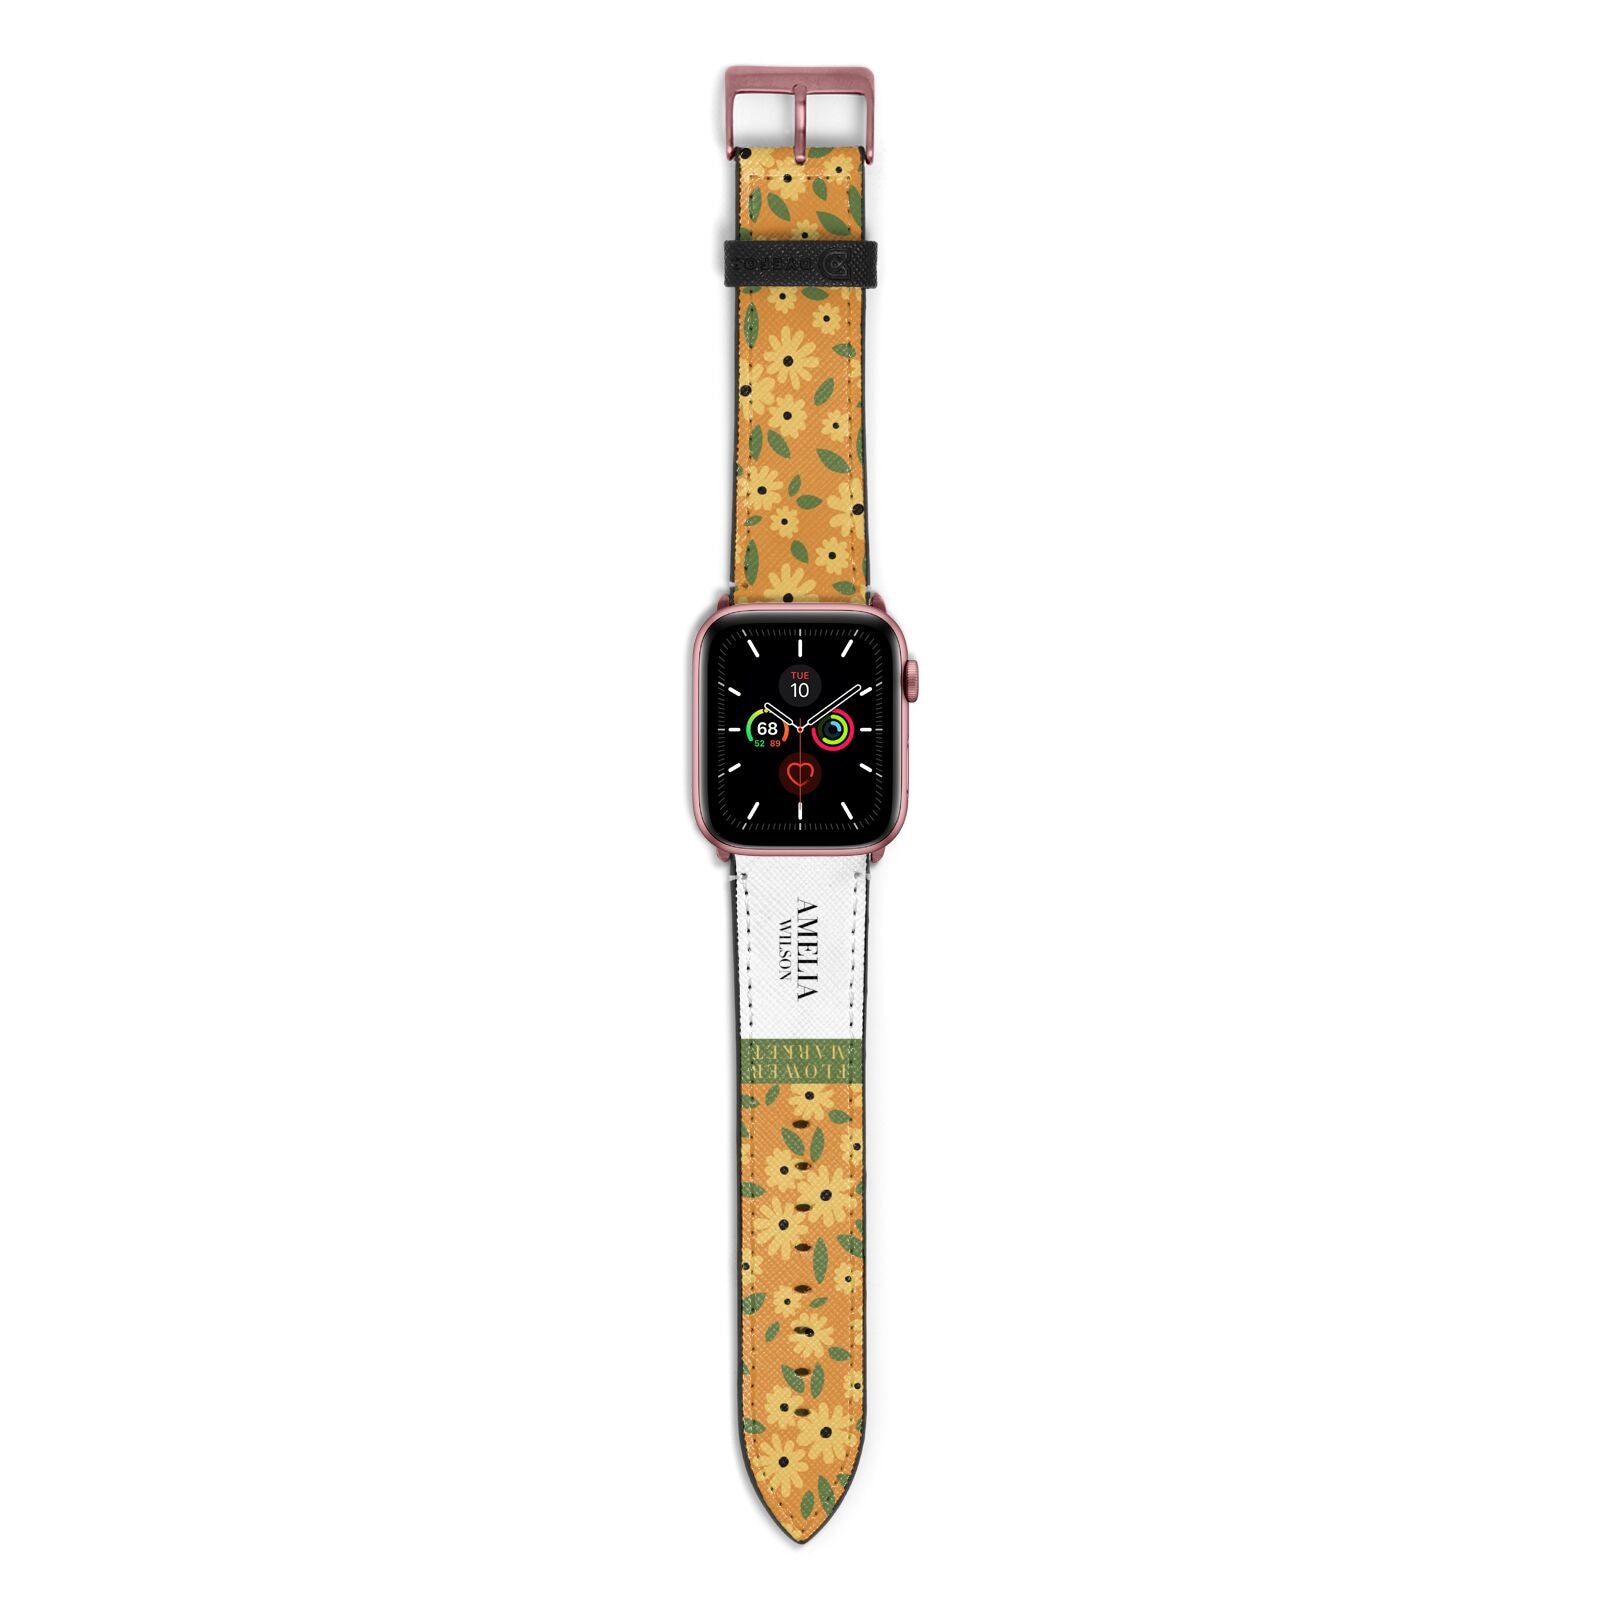 California Flower Market Apple Watch Strap with Rose Gold Hardware